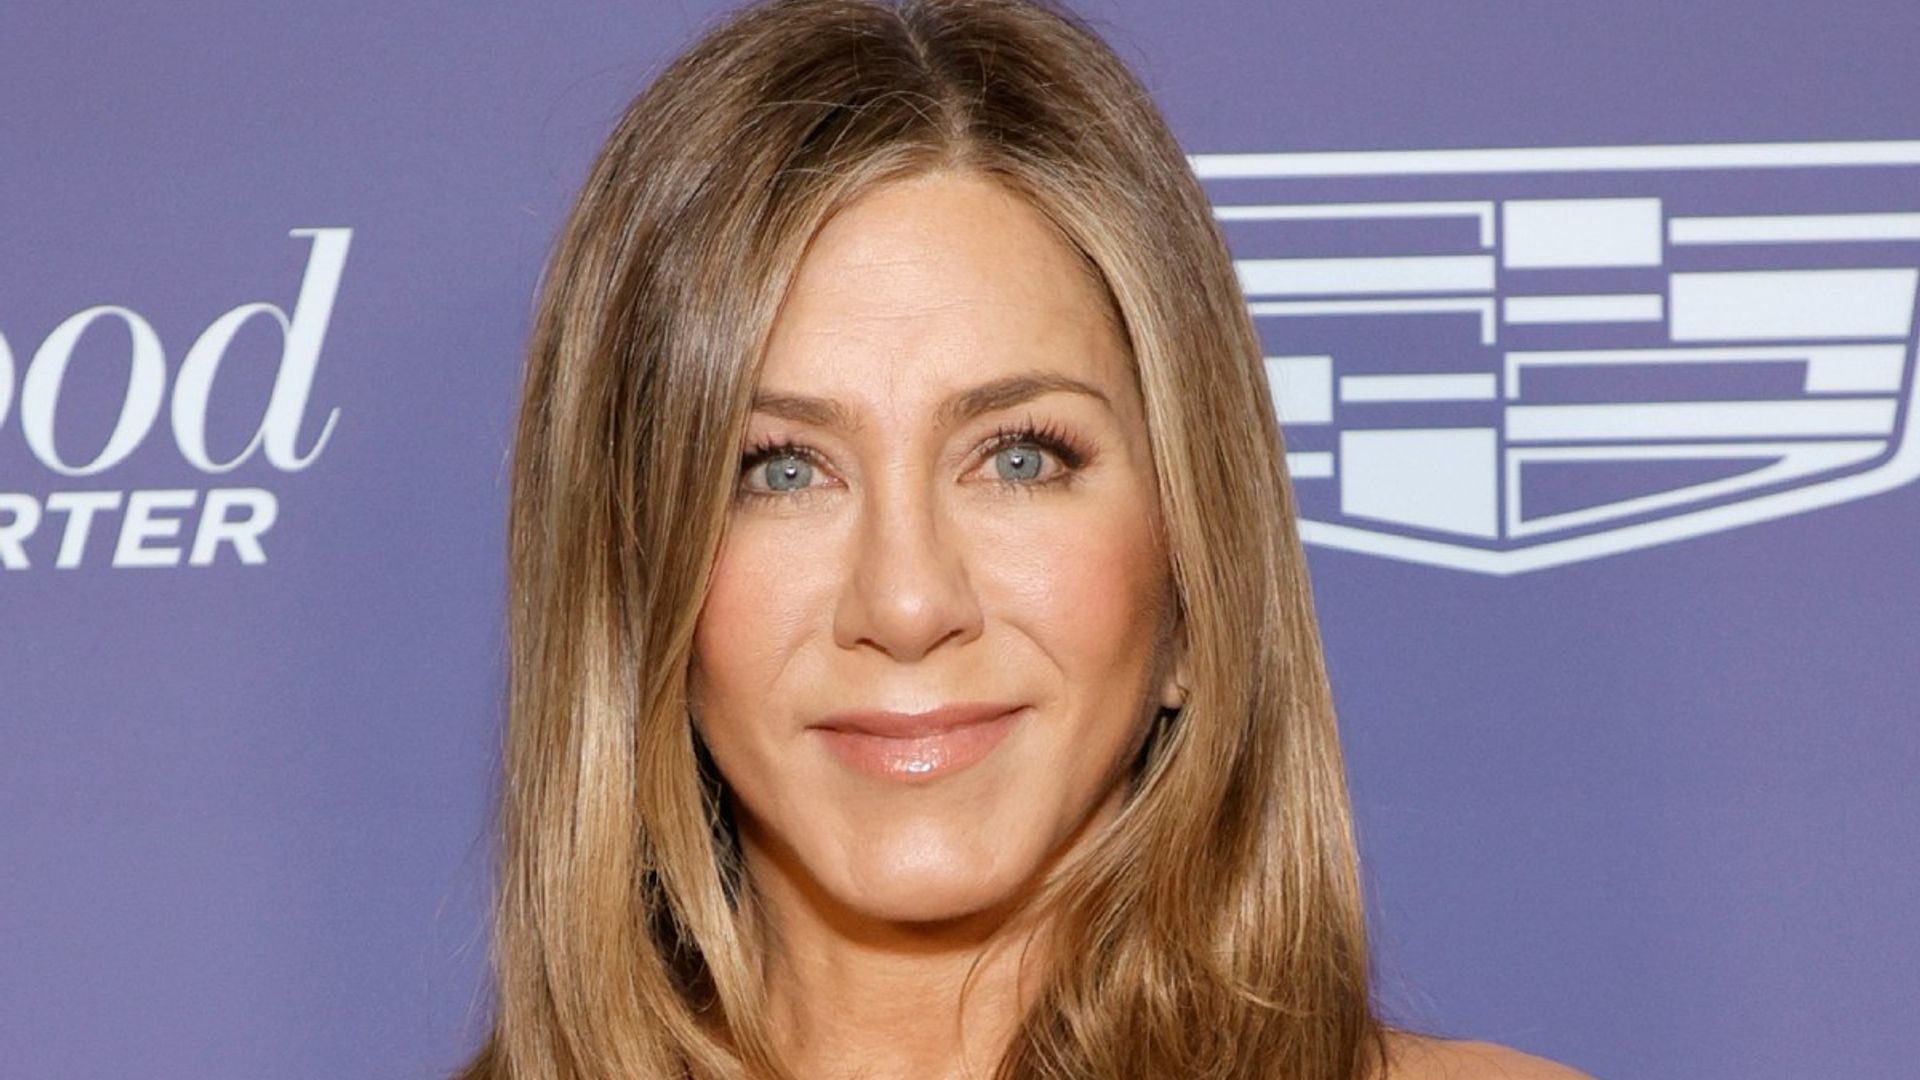 Jennifer Aniston Says Romantic Relationships Are 'Still a Challenge